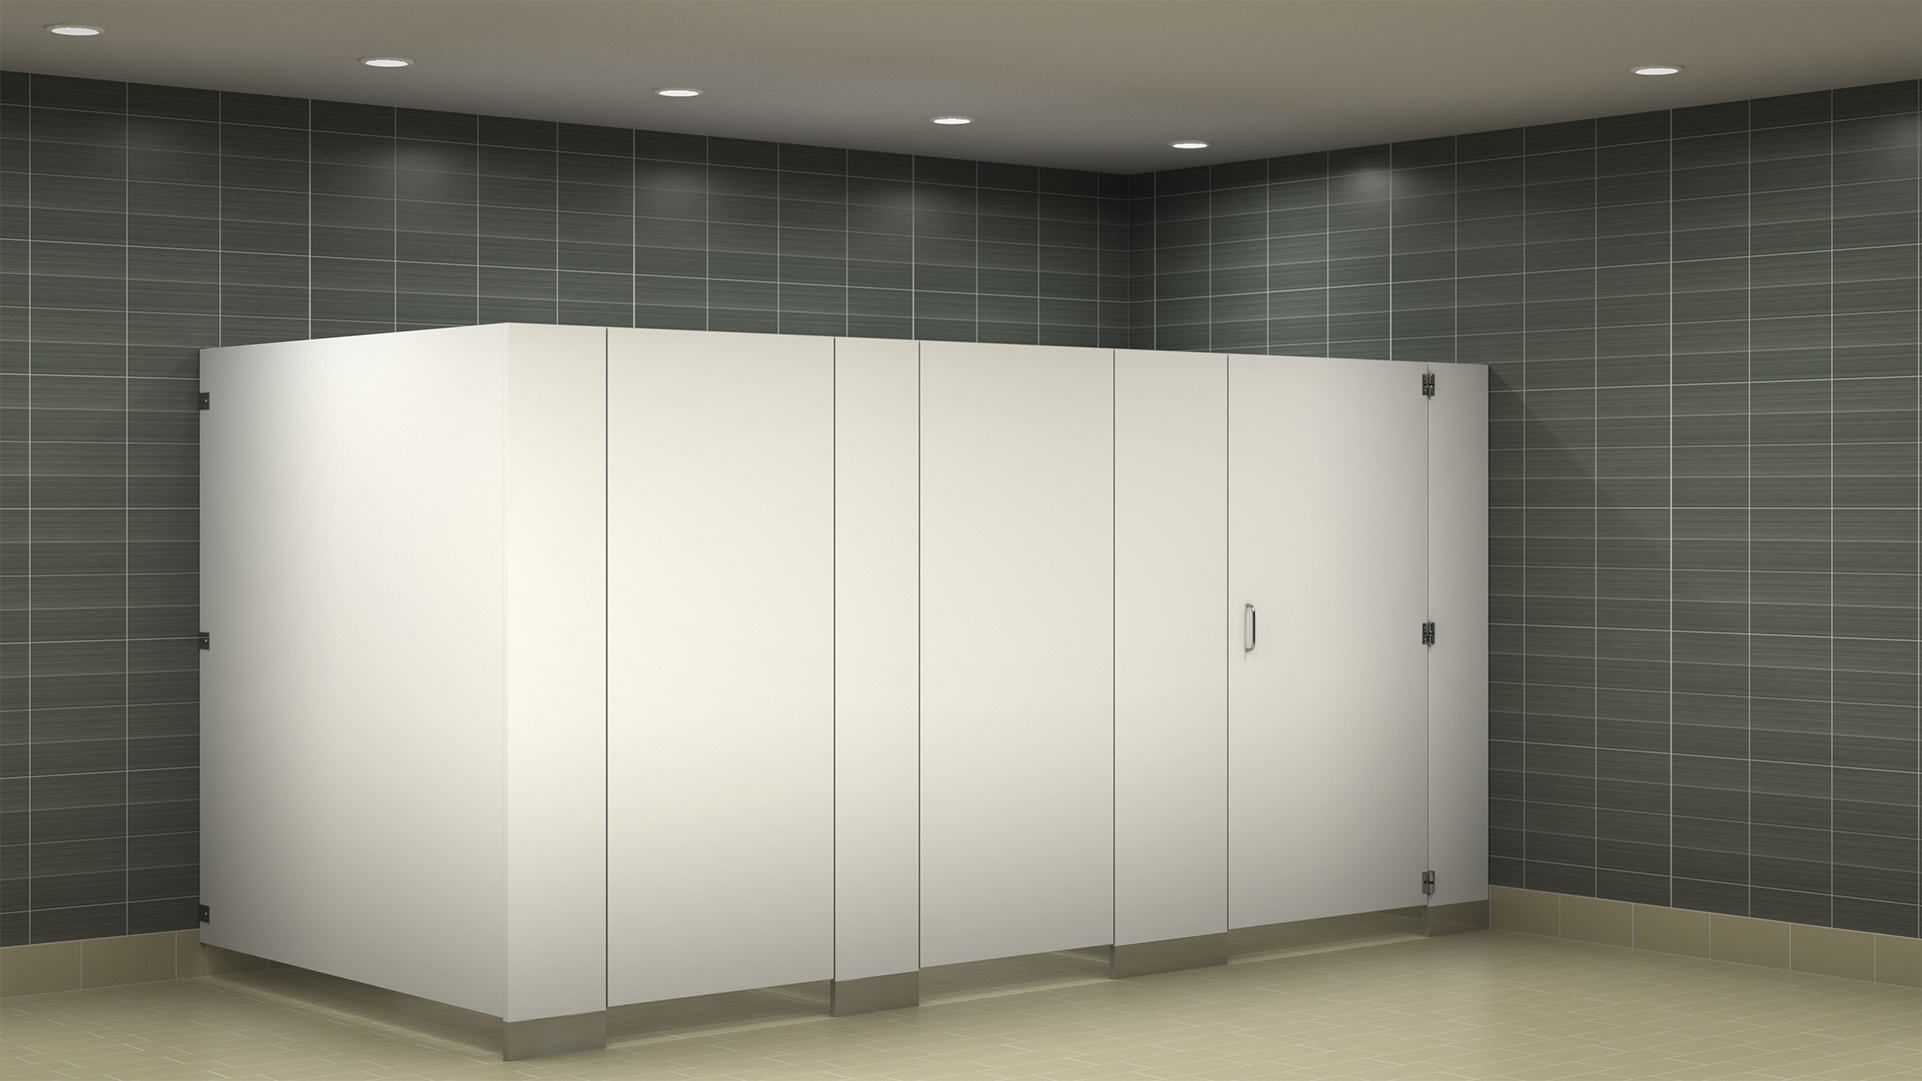 Bobrick Toilet Partitions sold by J. Laurenzo Specialties 